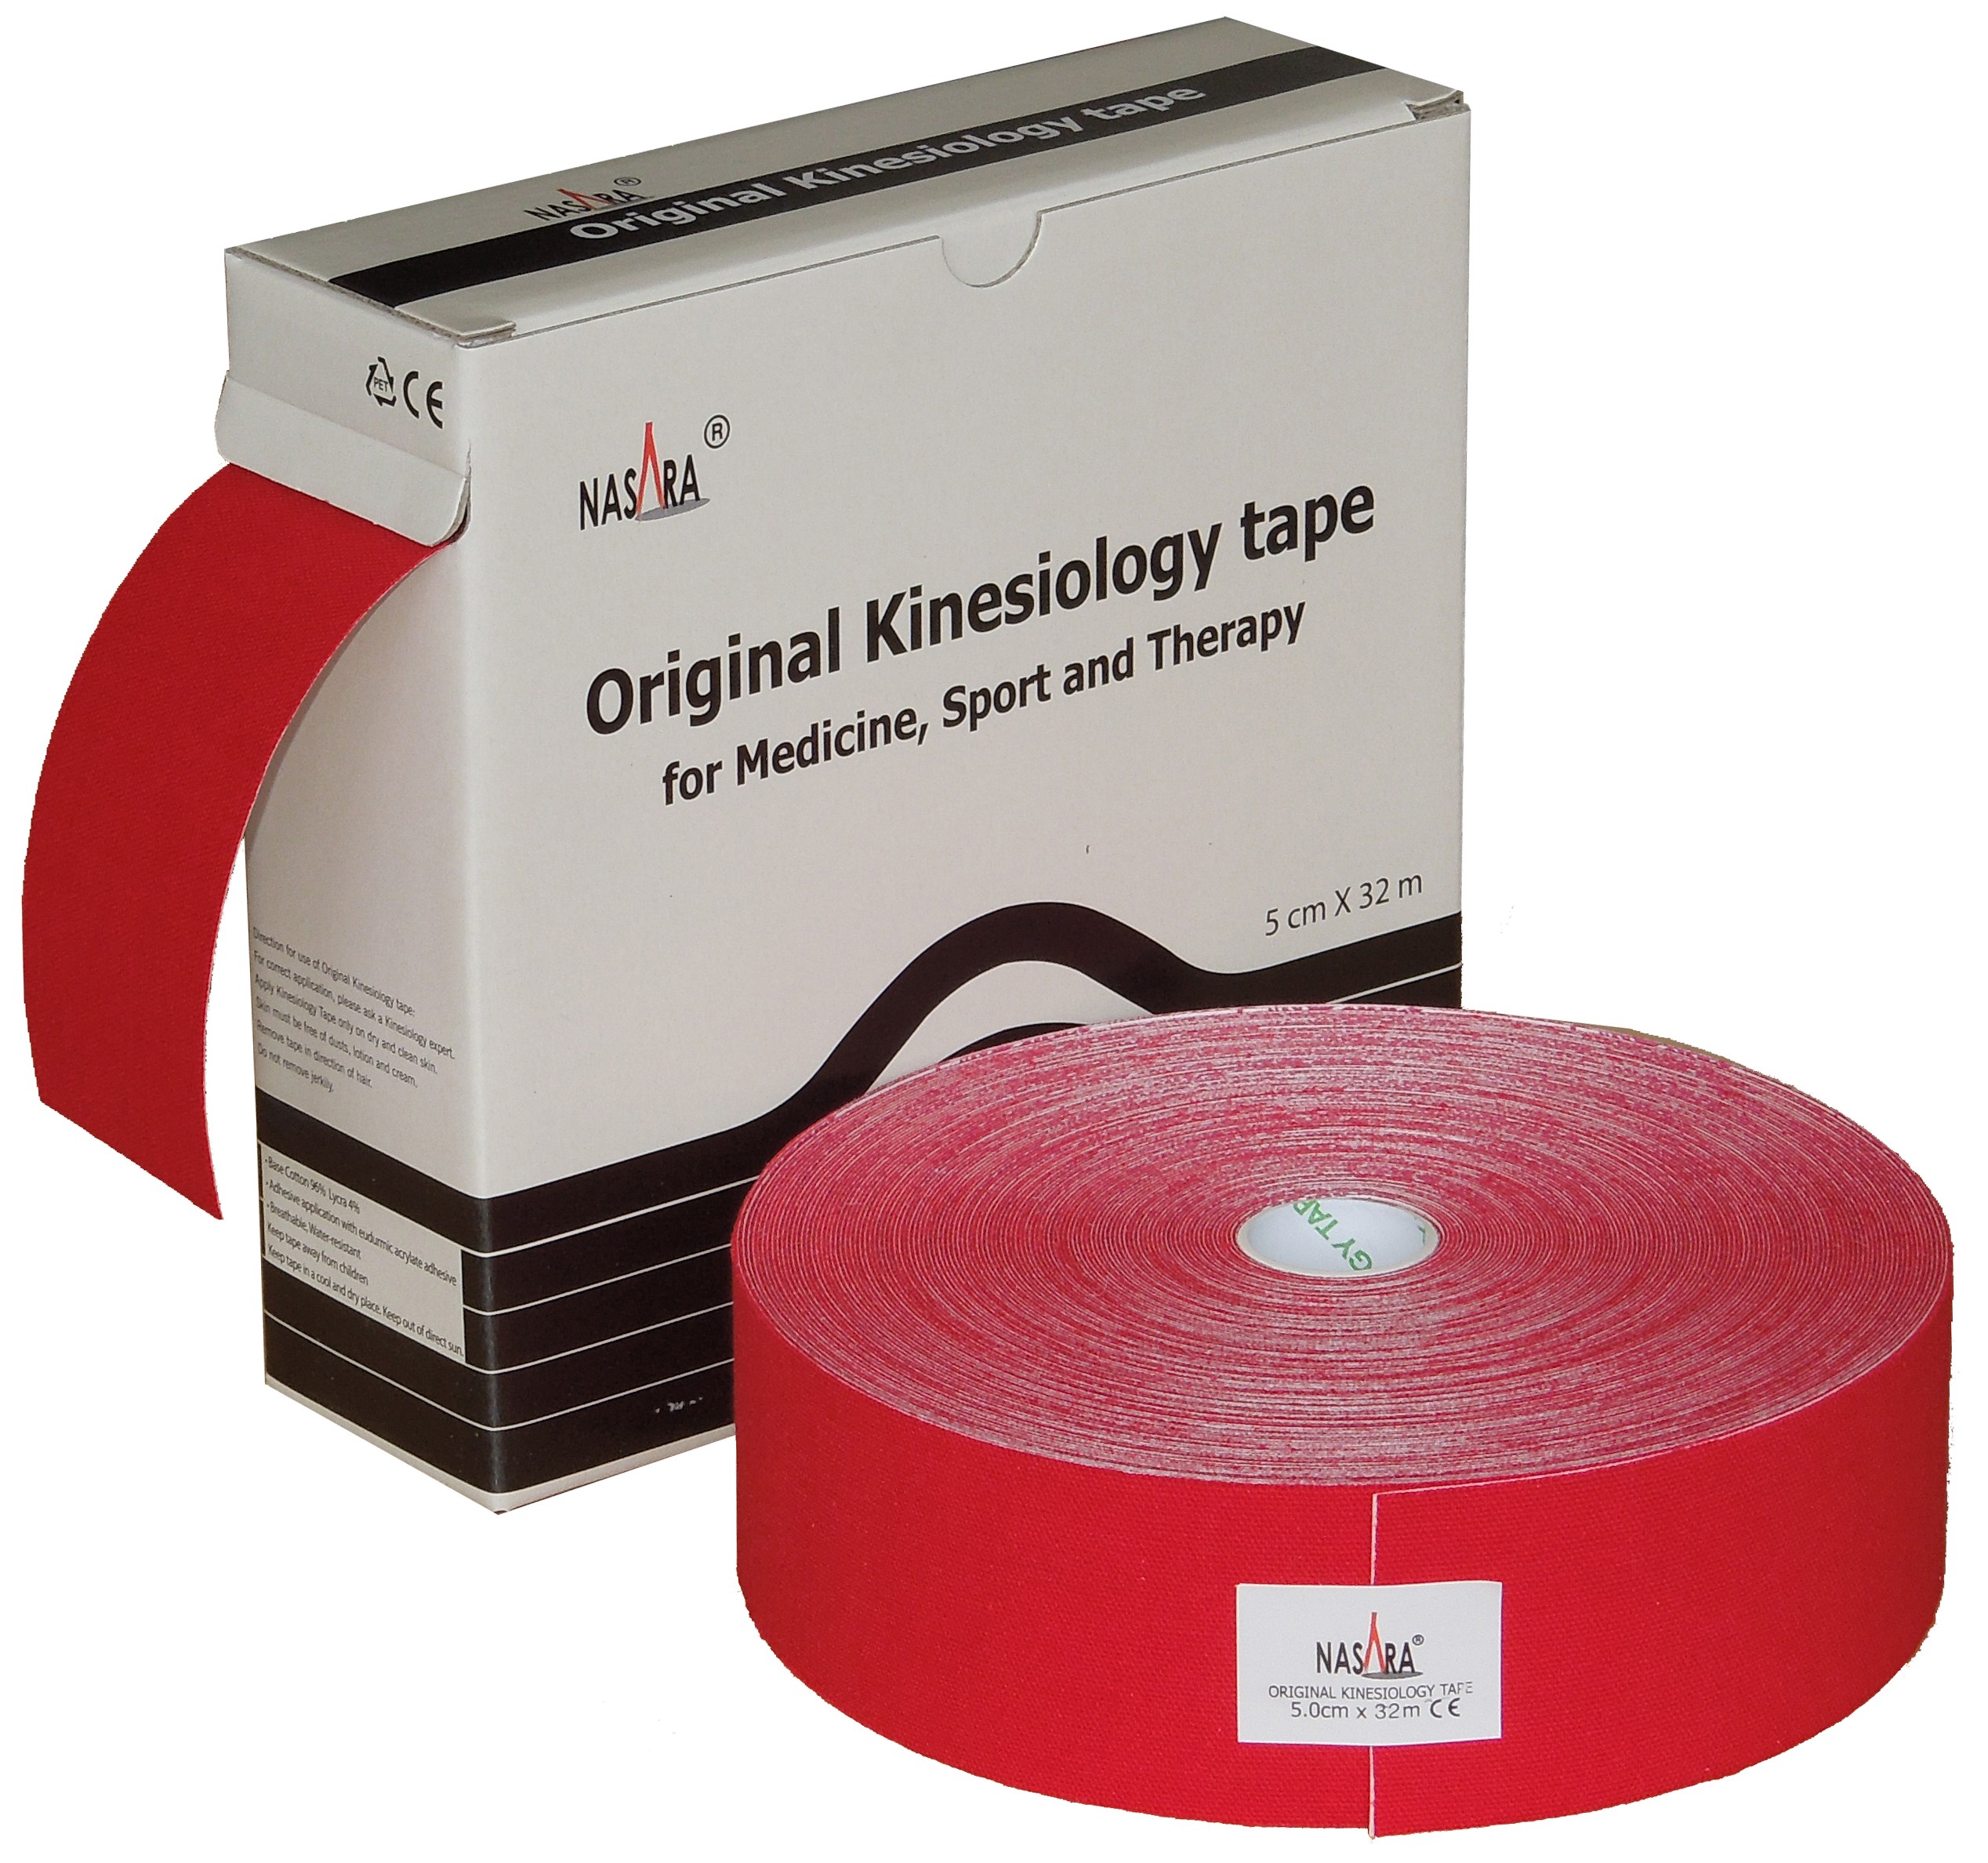 NASARA Kinesiology Tape 32m Groß-Rolle - Rot